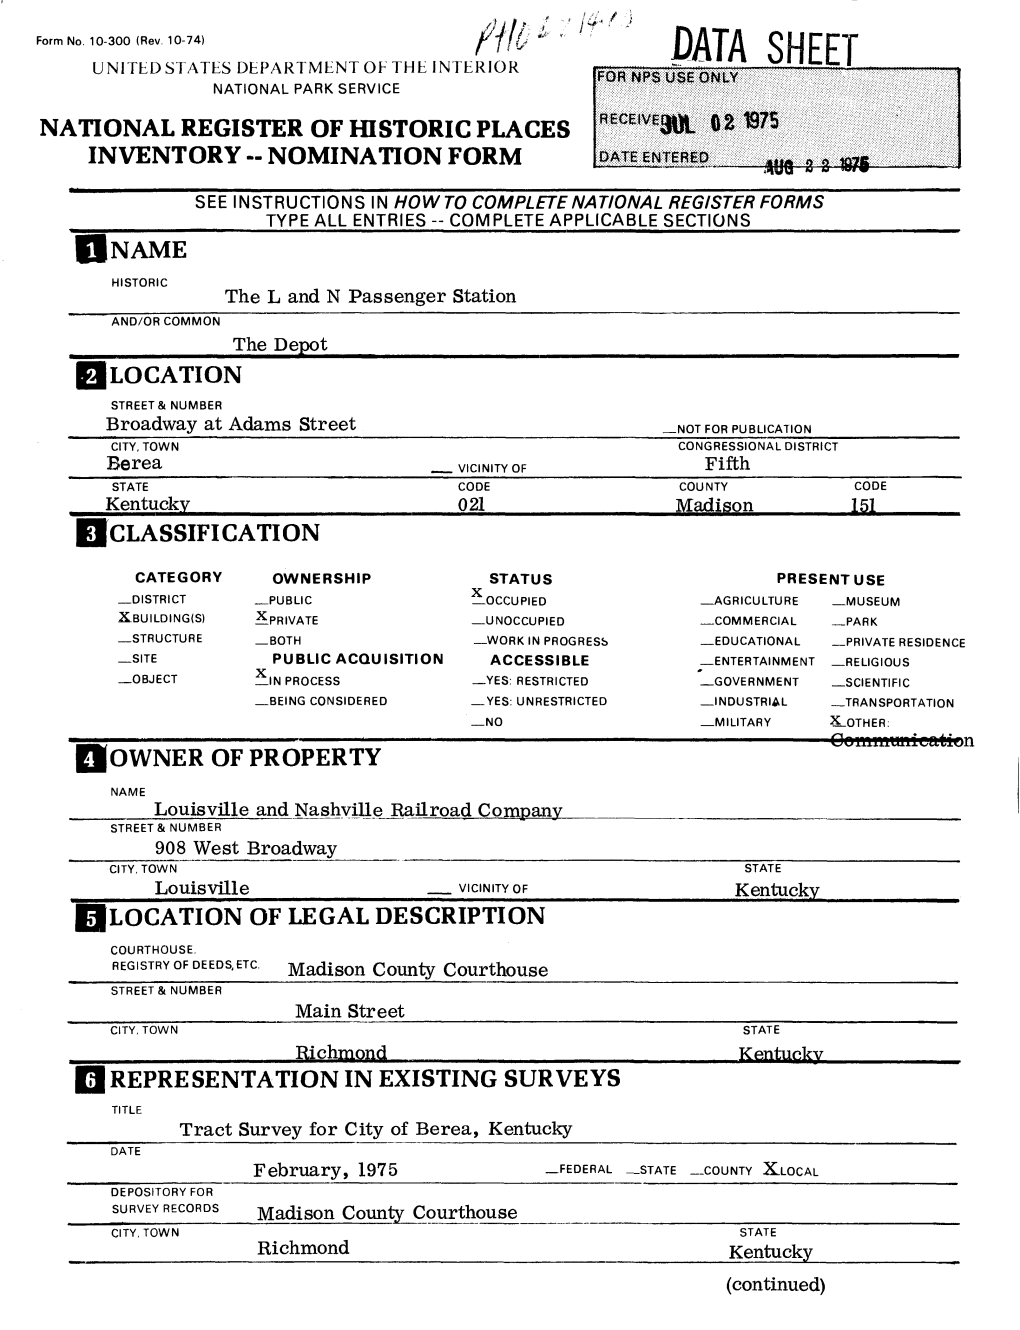 PATA SHEET UNITED STATES DEPARTMENT OE the INTERIOR NATIONAL PARK SERVICE |L|:|||^I|||||||| NATIONAL REGISTER of HISTORIC PLACES INVENTORY -- NOMINATION FORM